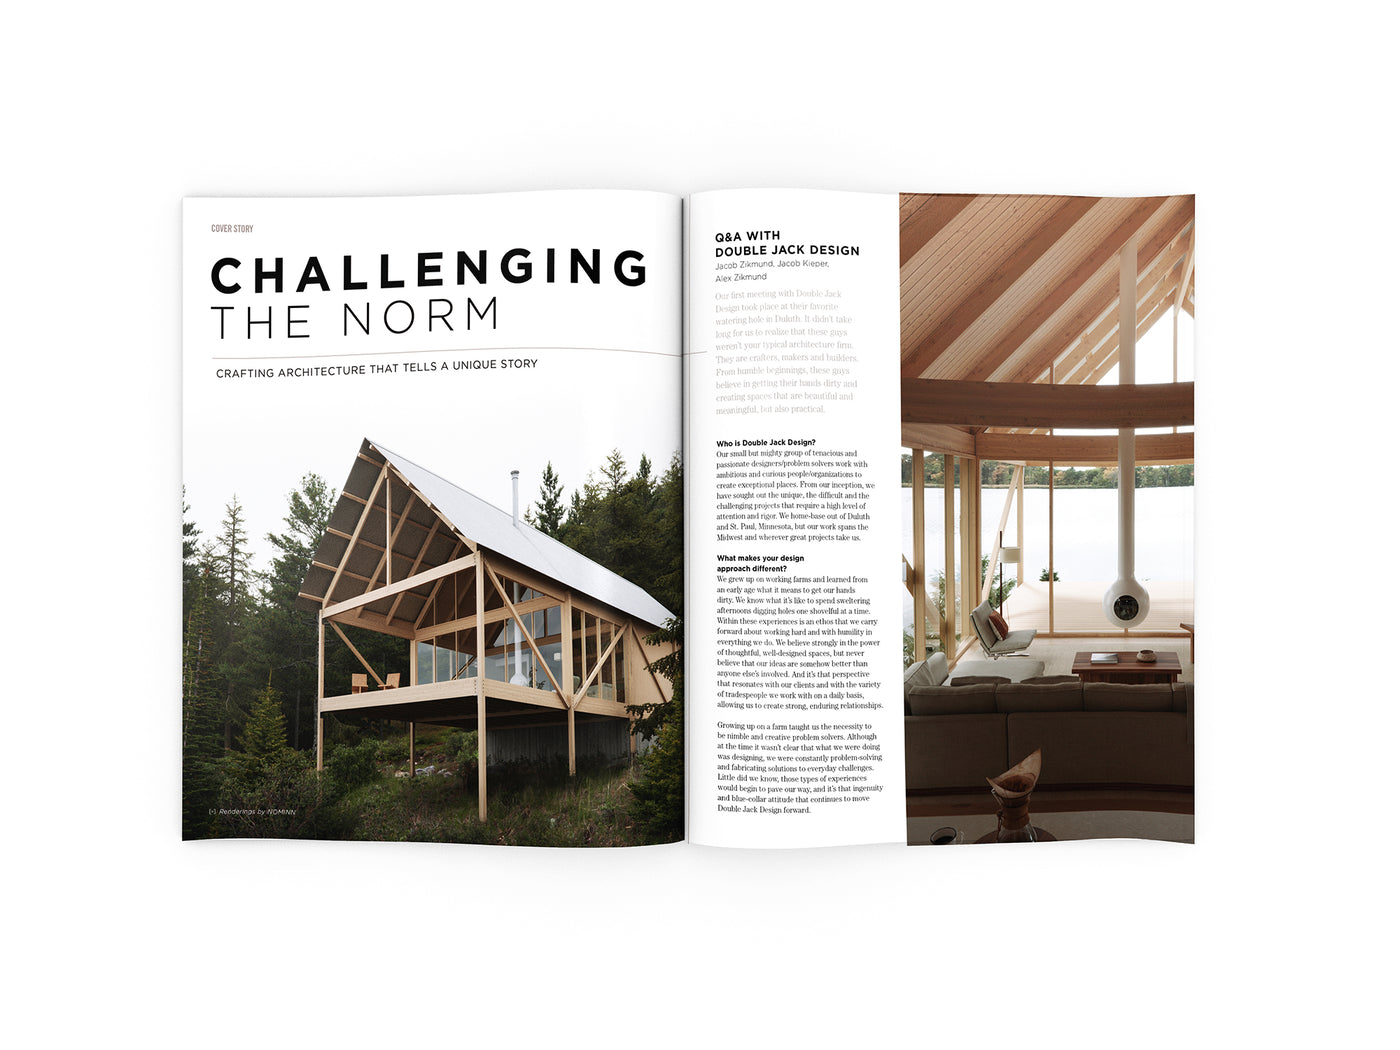 Lake and Company Minnesota Issue 23 - Challenging the Norm Story - The Lake and Company